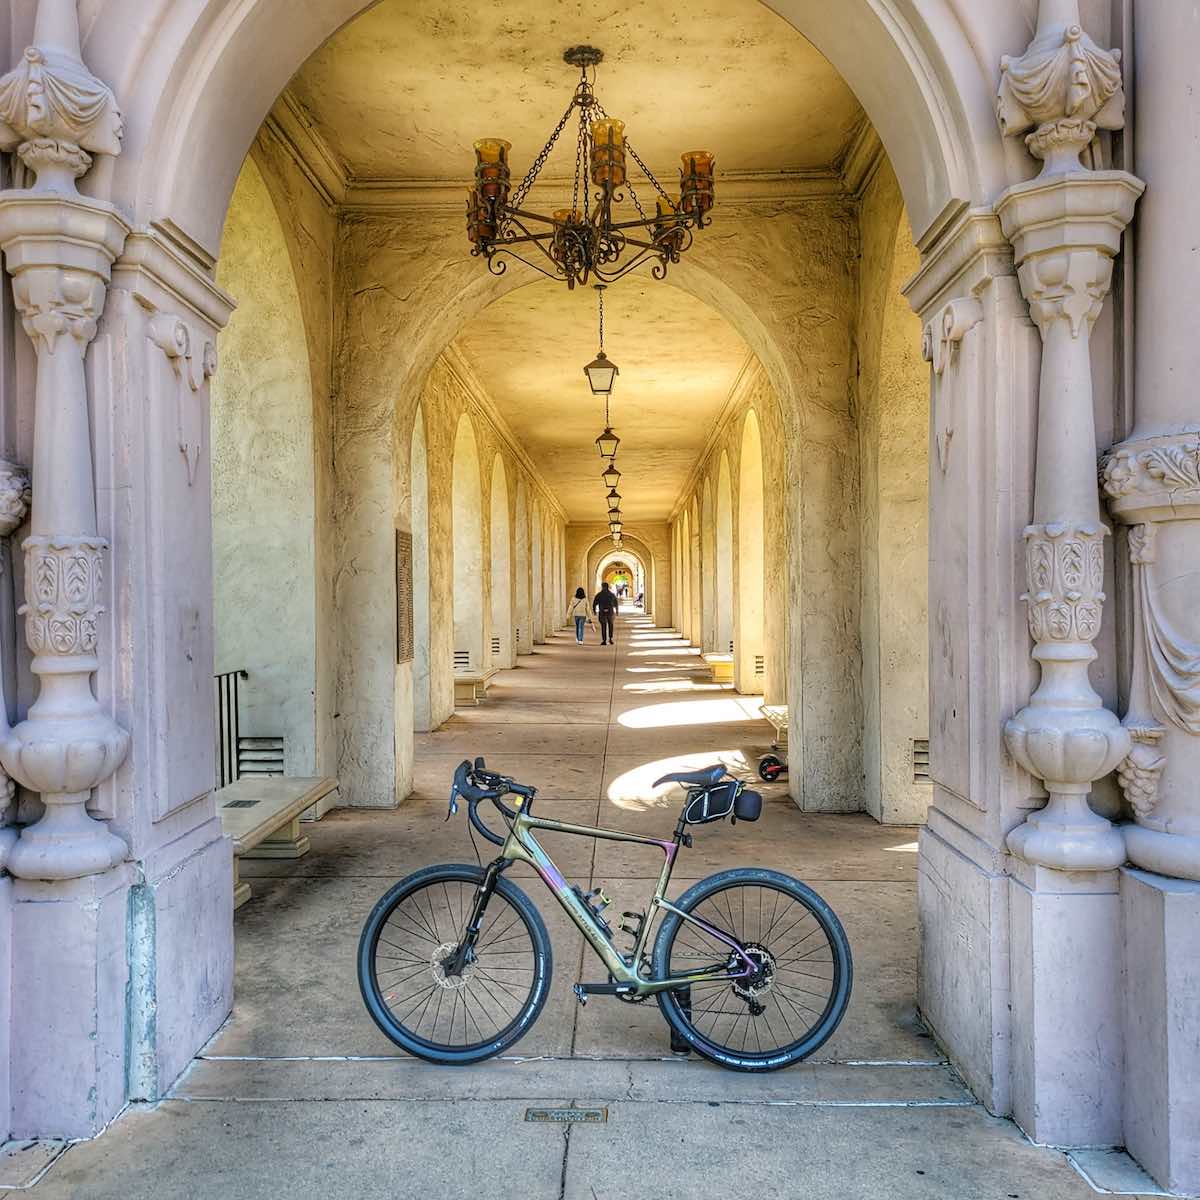 a bicycle sits in the entry way of an ornate balboa park in san diego california.